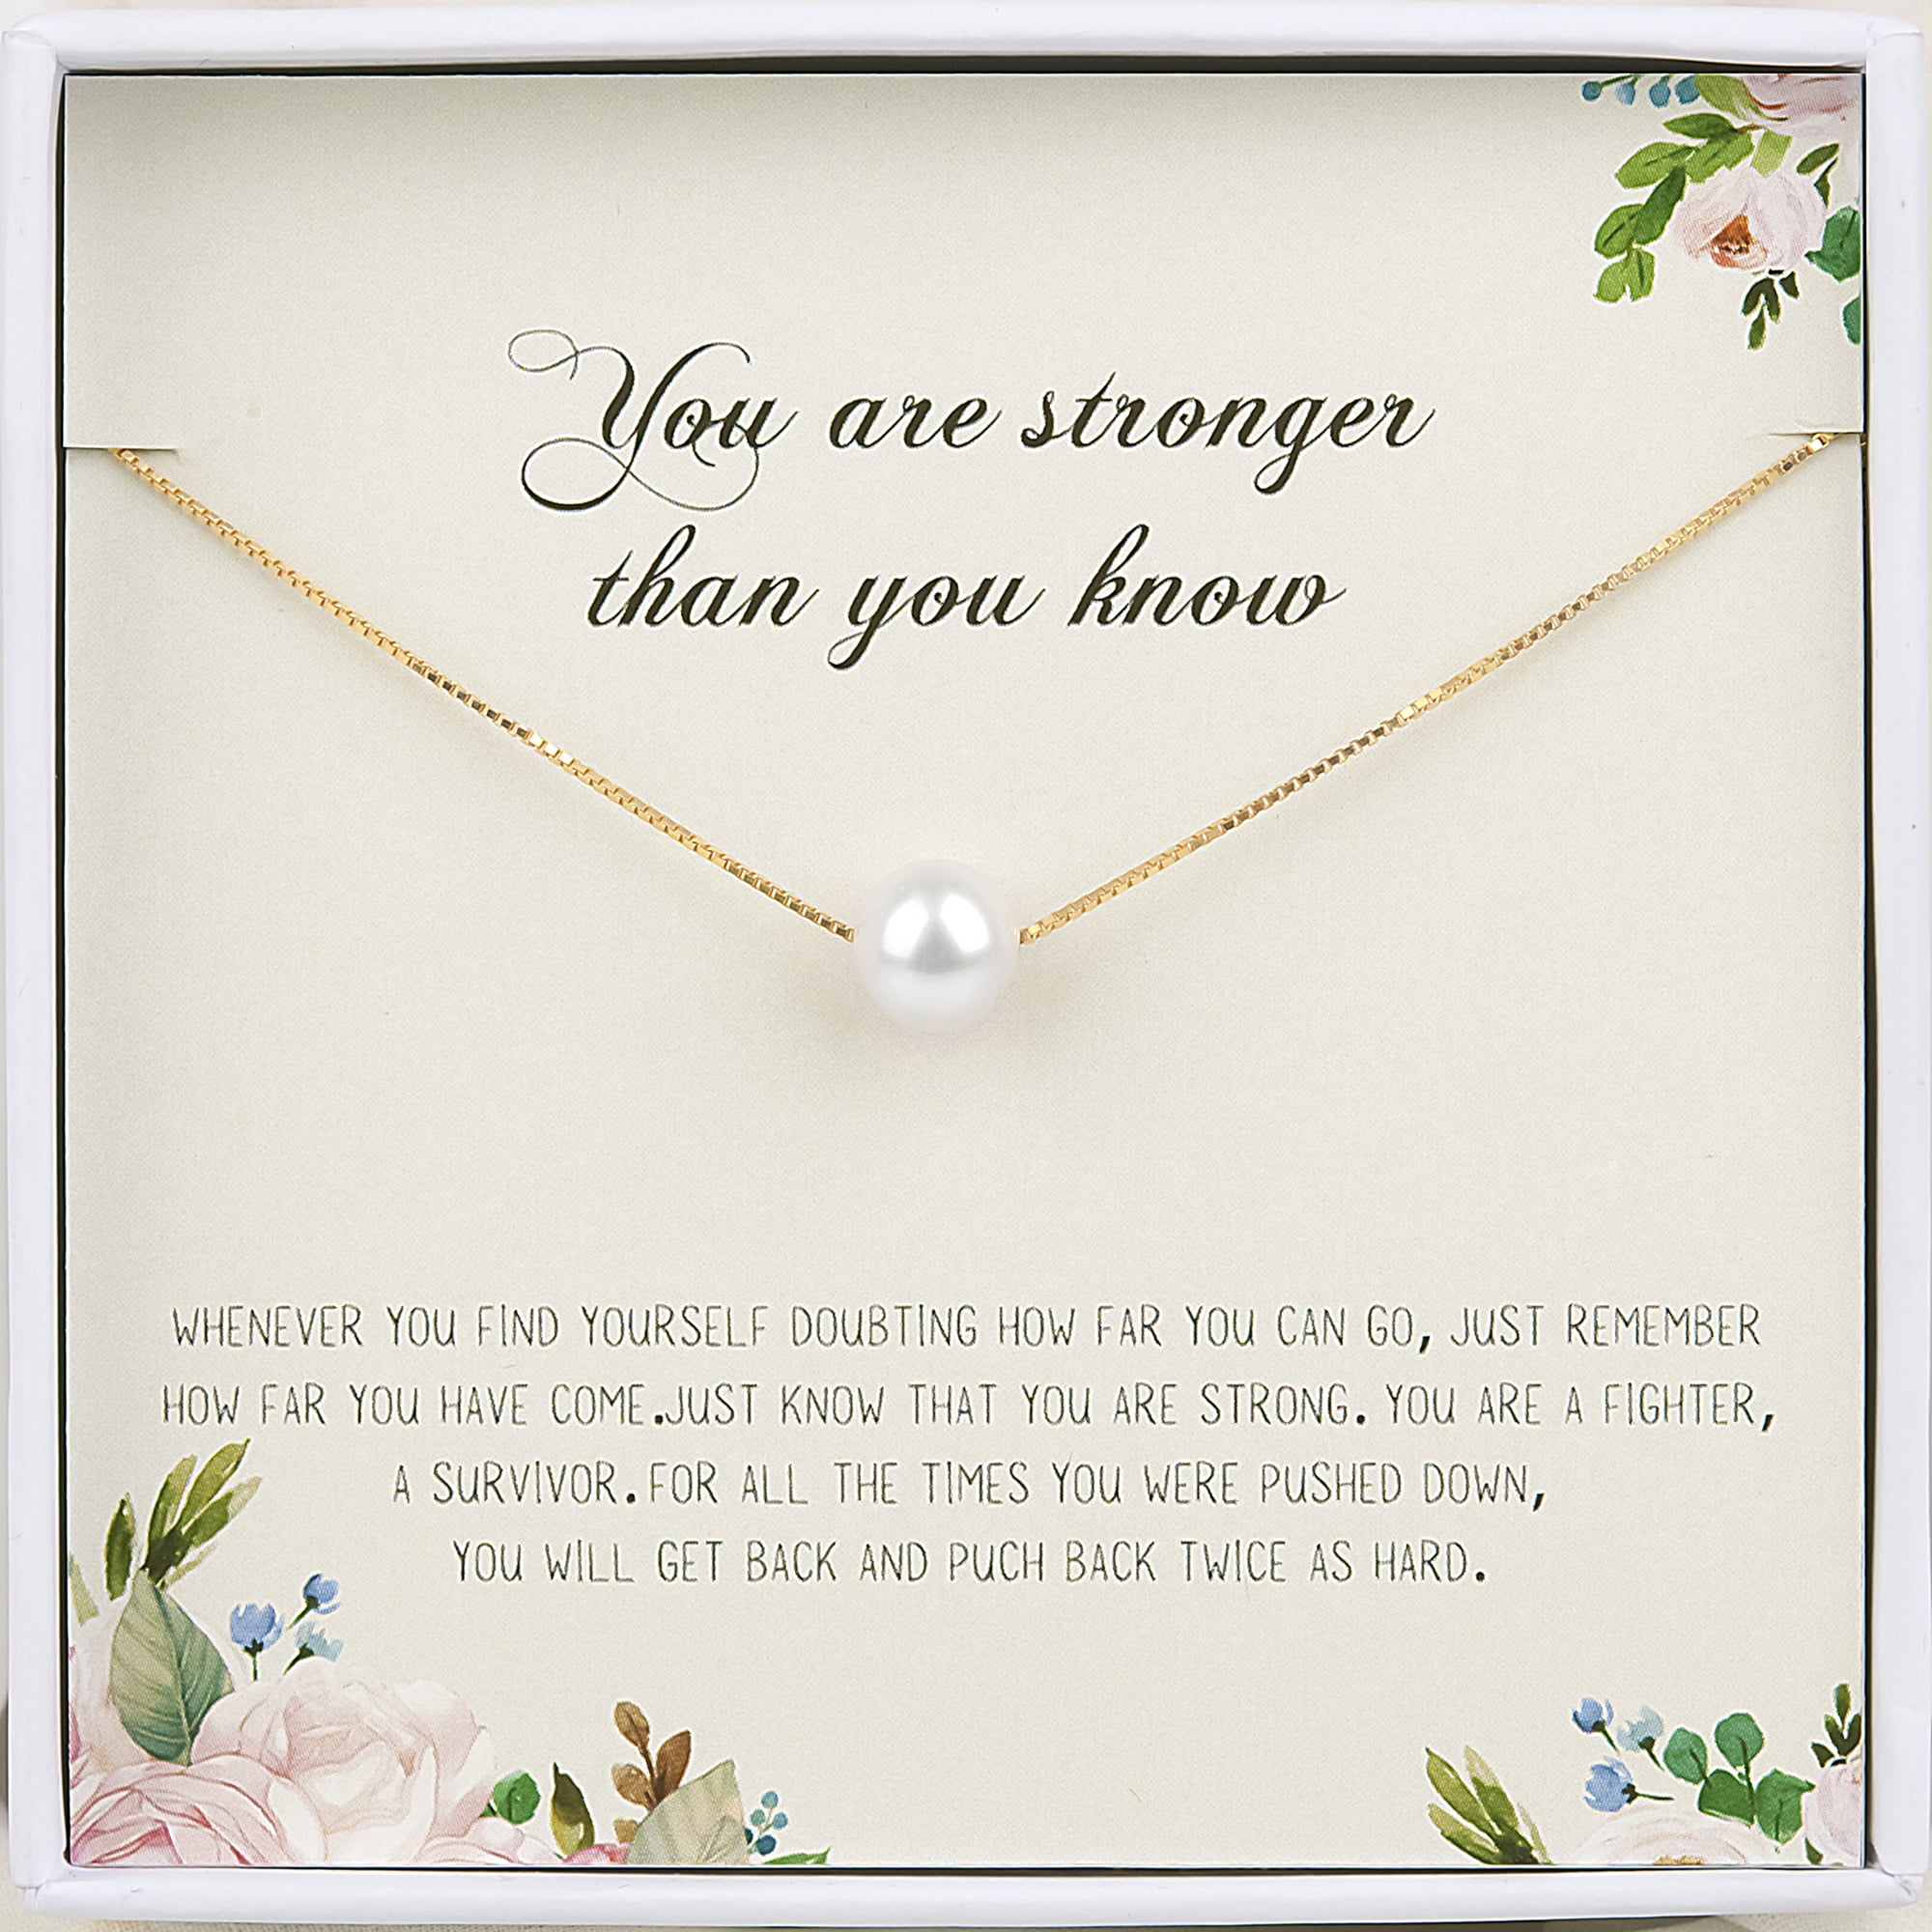 Anavia You are Stronger Inspirational Gift Necklace for BFF Recovery gifts Encouragement Gift for Soul Sister White Pearl Gold Chain 1f8ccdcf 18d3 4b49 8c9c 574a4d5e58b9.67921f2f2bb404cbdcff5ce2045c54c4